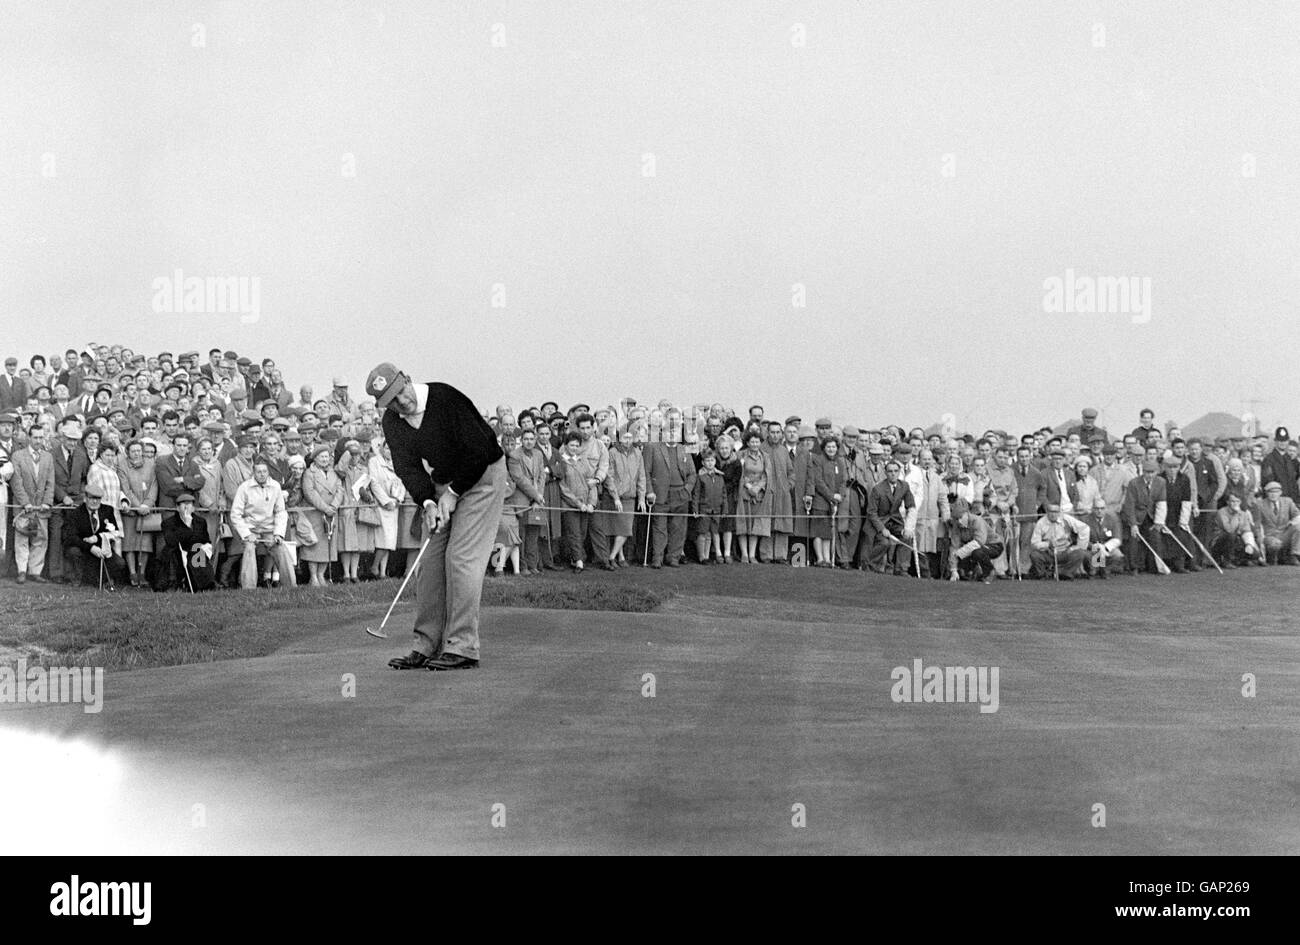 Golf - Ryder Cup - Great Britain and Ireland v USA - Royal Lytham and St Annes. Jay Hebert of the USA playing at the 13th green against Great Britain's Dai rees. Rees won 2 and 1. Stock Photo